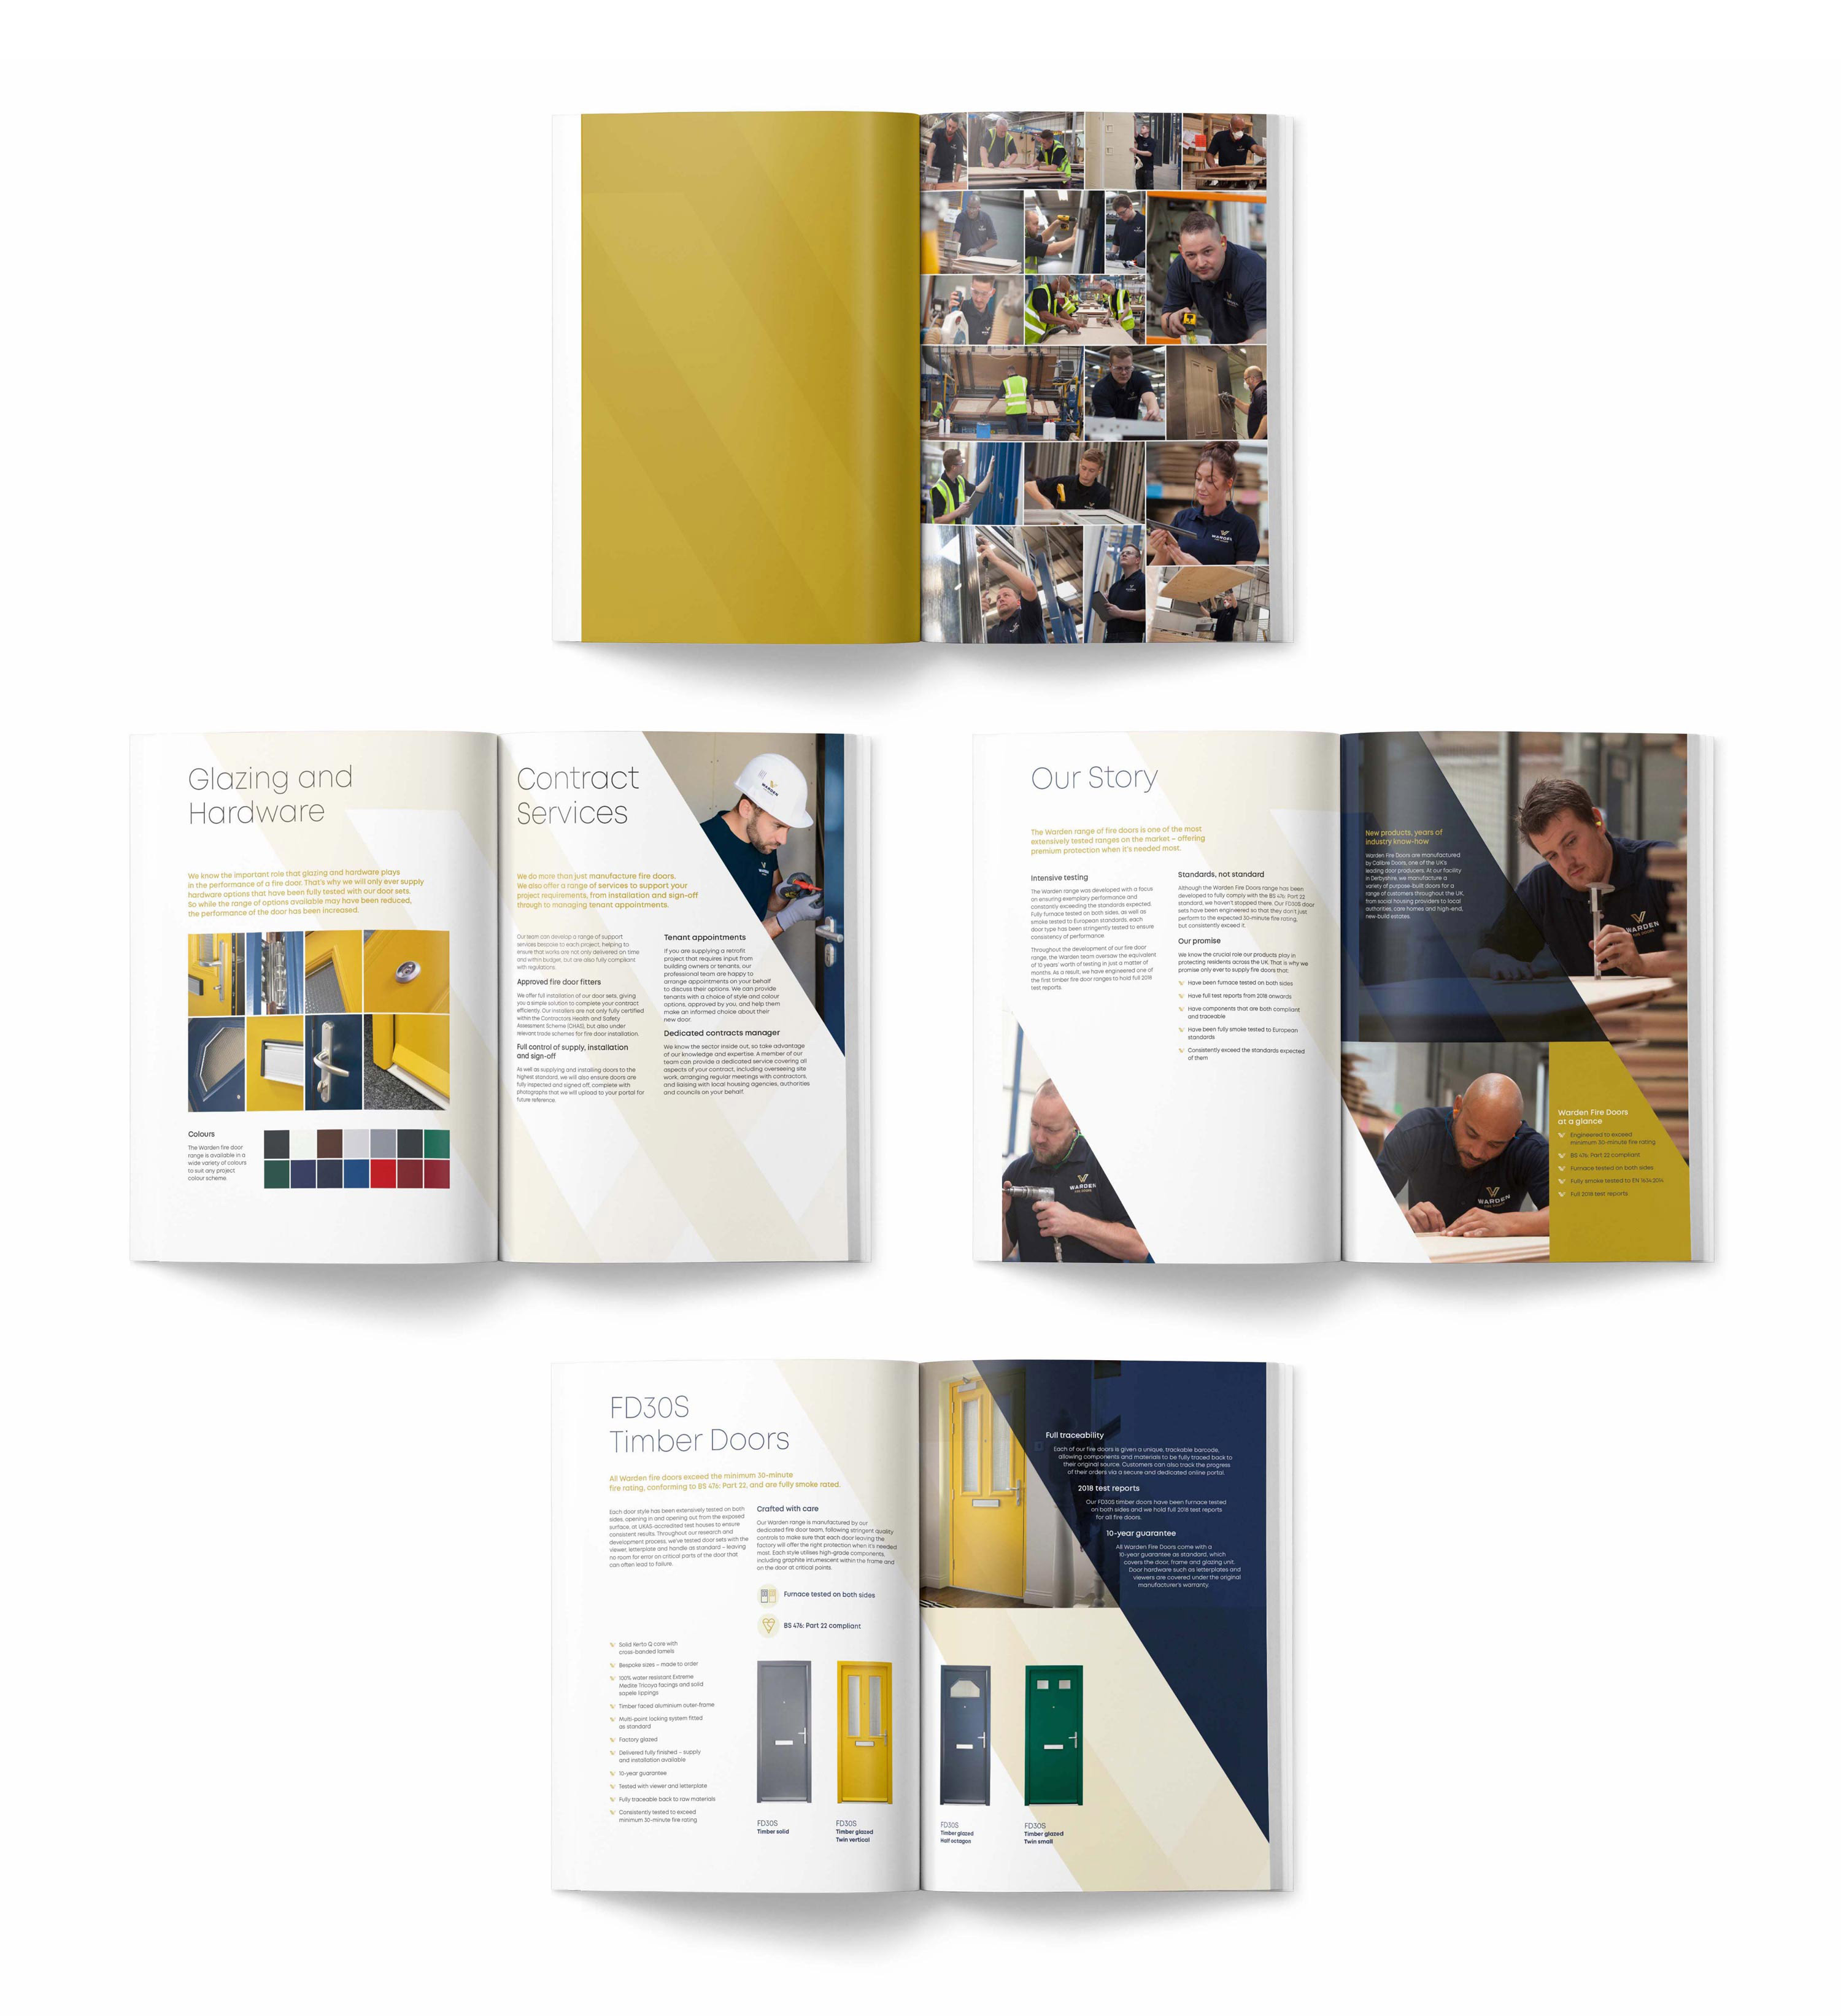 Inner pages from the Warden Fire Doors brochure, designed by branding agency Mighty